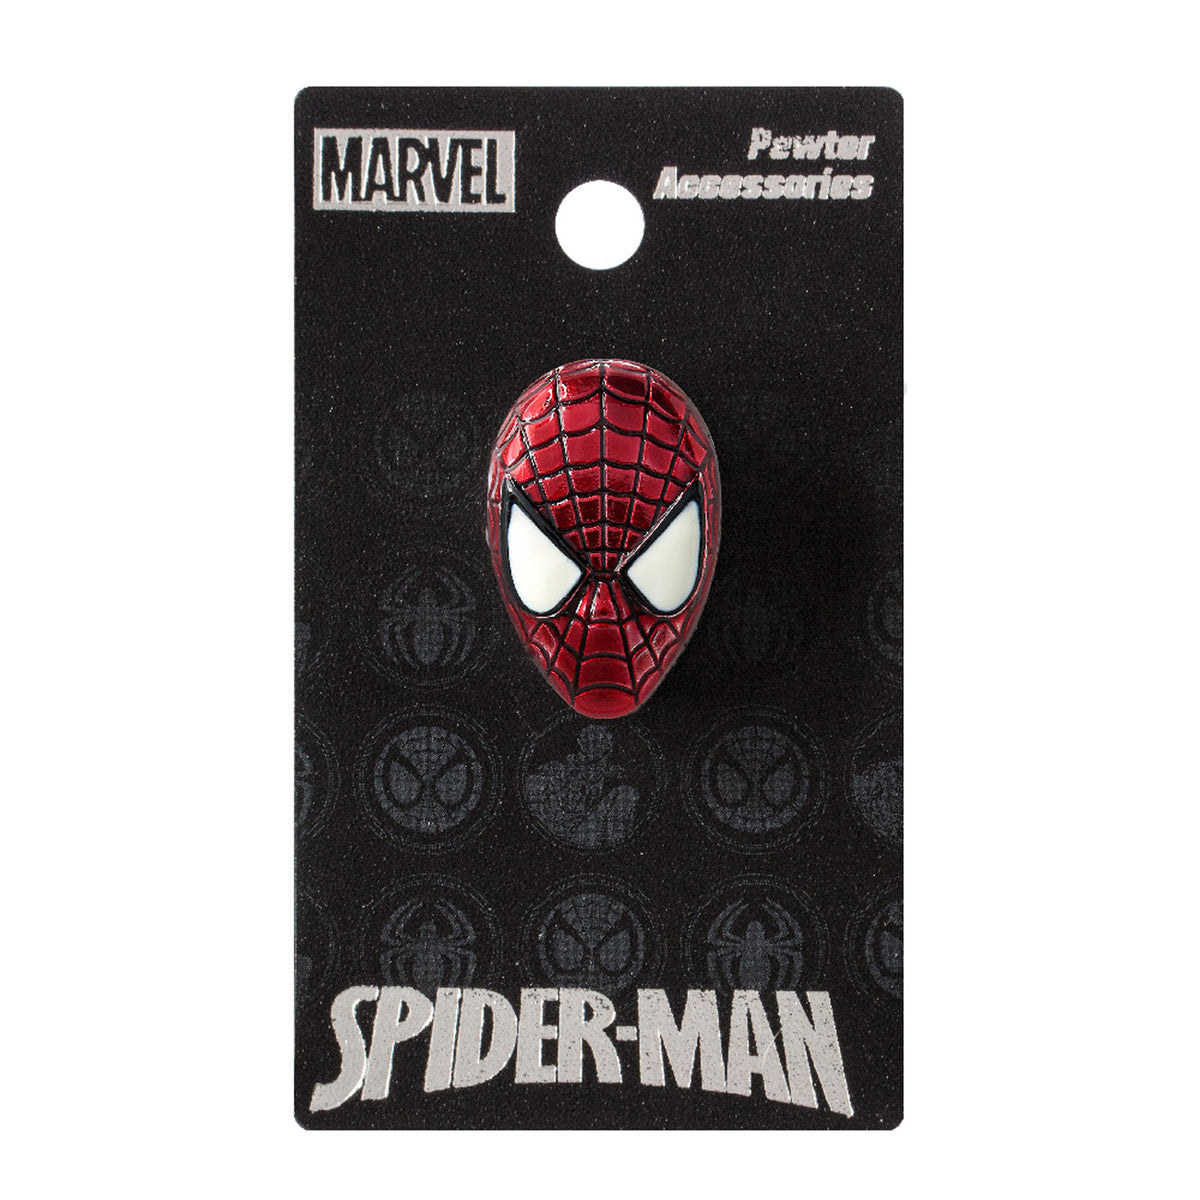 Marvel Spiderman Collectible Pin